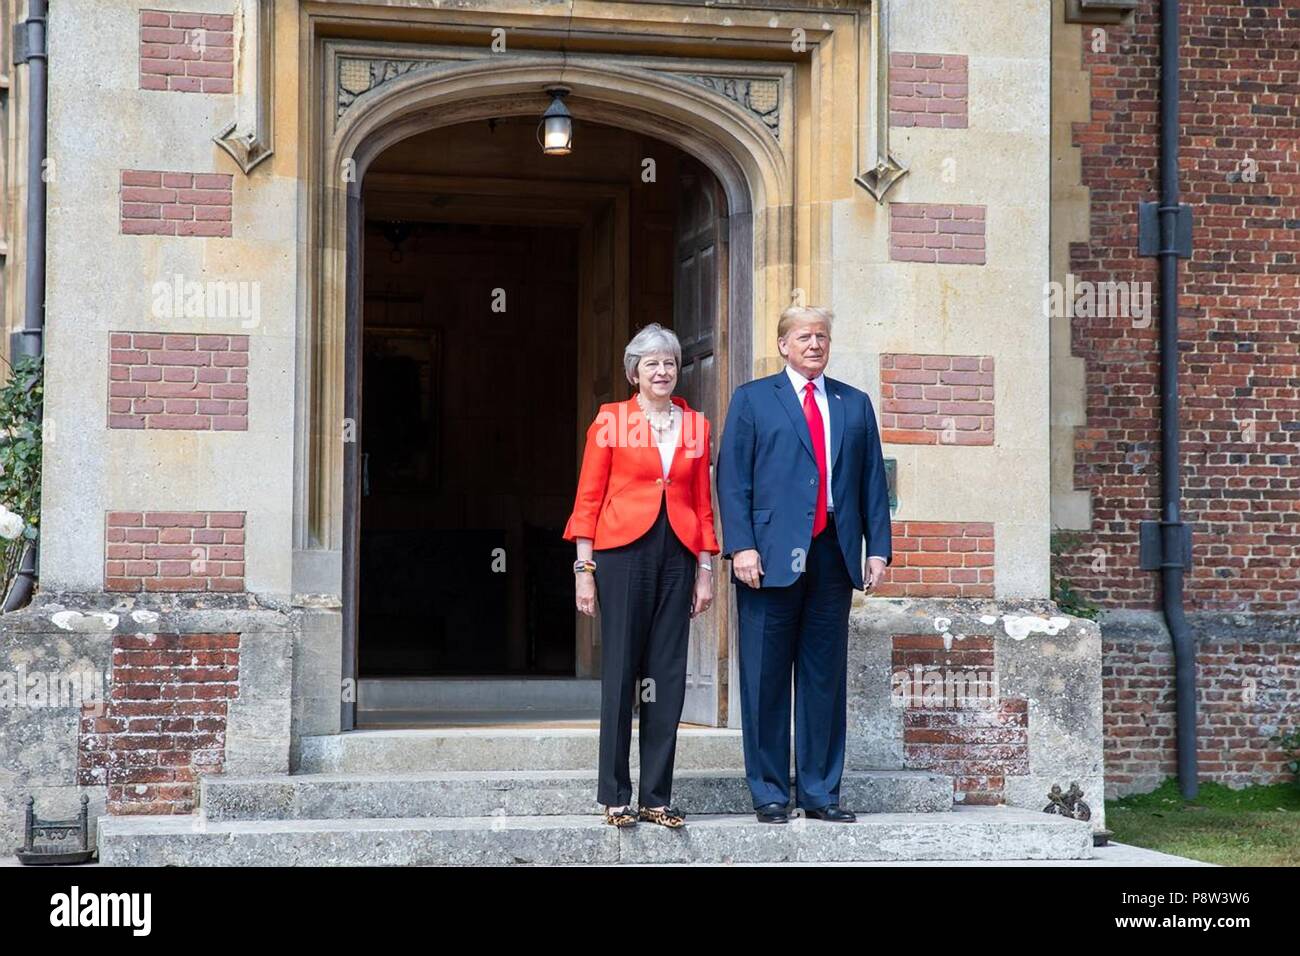 London, UK, 13 July 2018. U.S President Donald Trump and British Prime Minister Theresa May stand for a photo on arrival for bilateral talks at Chequers July 12, 2018 in Buckinghamshire, England. Chequers is the country residence of the Prime Minister. Credit: Planetpix/Alamy Live News Stock Photo